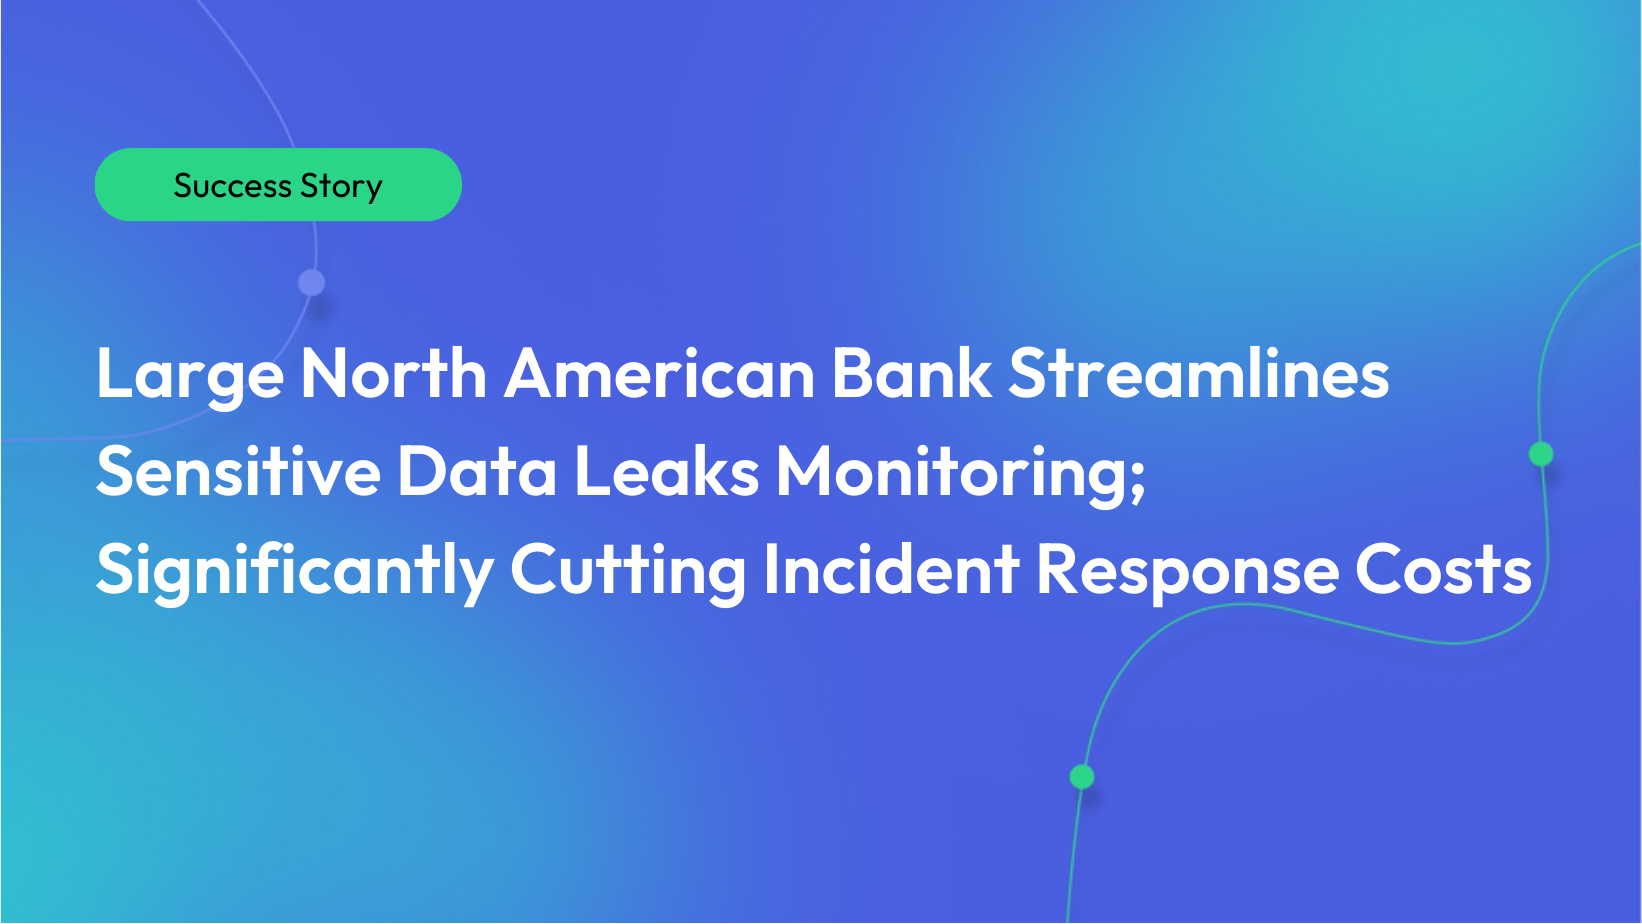 Gradient blue and lighter turquoise background. There is a green bubble in the top left that says "Success Story." White text below it says "Large North American Bank Streamlines Sensitive Data Leaks Monitoring; Significantly Cutting Incident Response Costs"